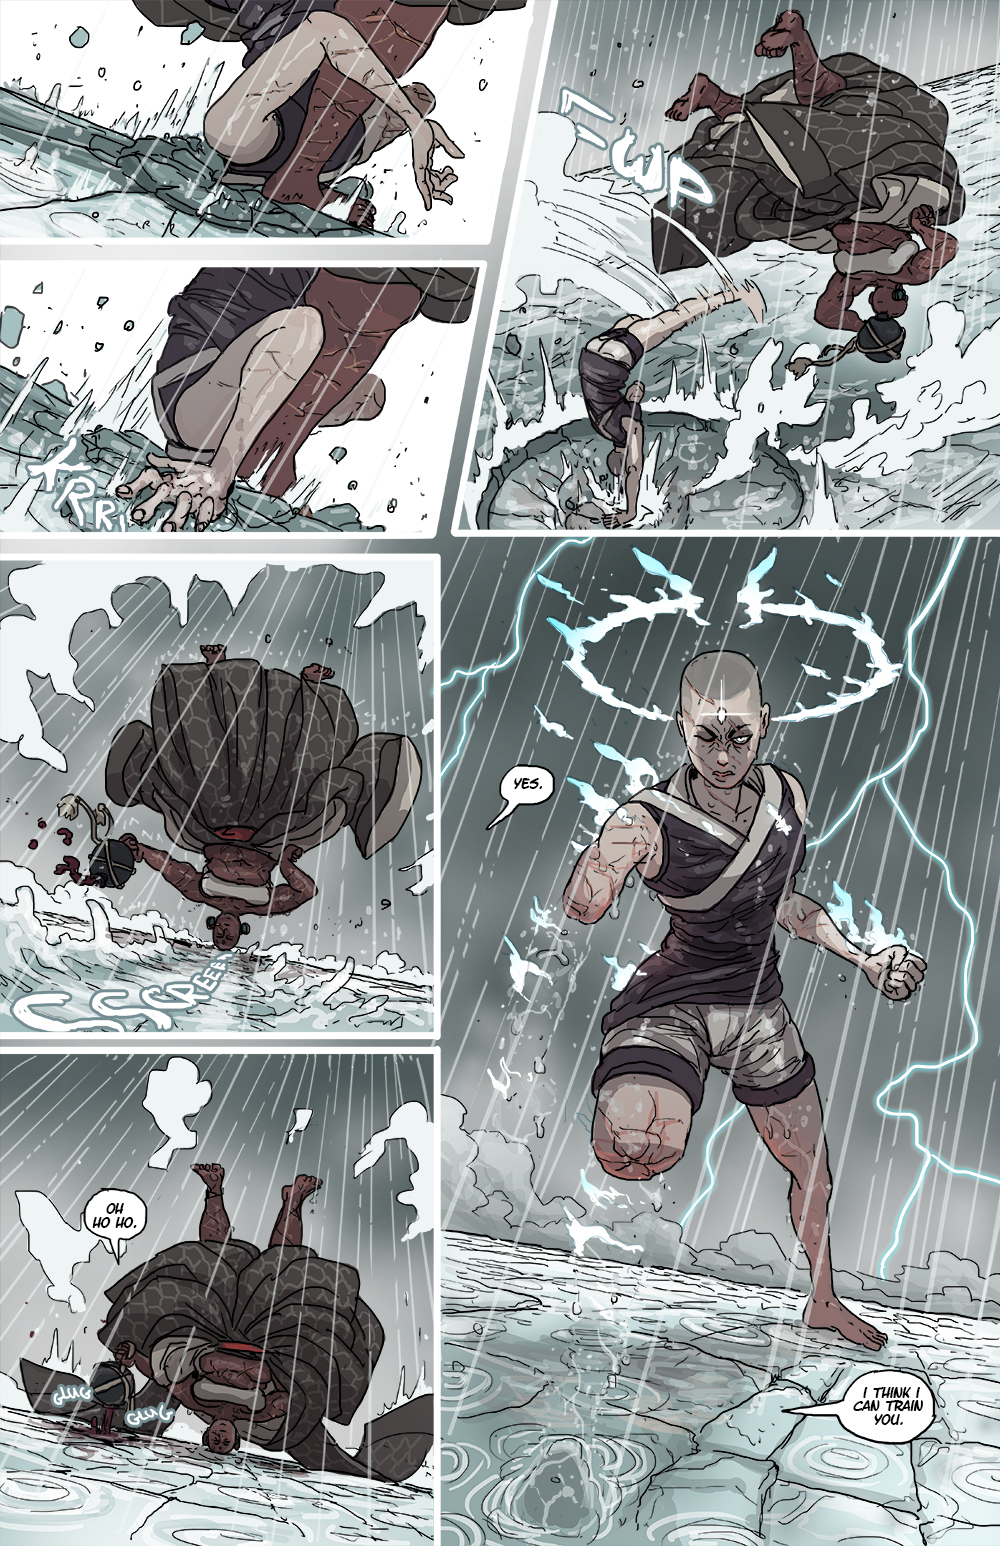 this is where this comic was inevitably going to go, two bald very fucked up women beating the shit out of each other in the rain